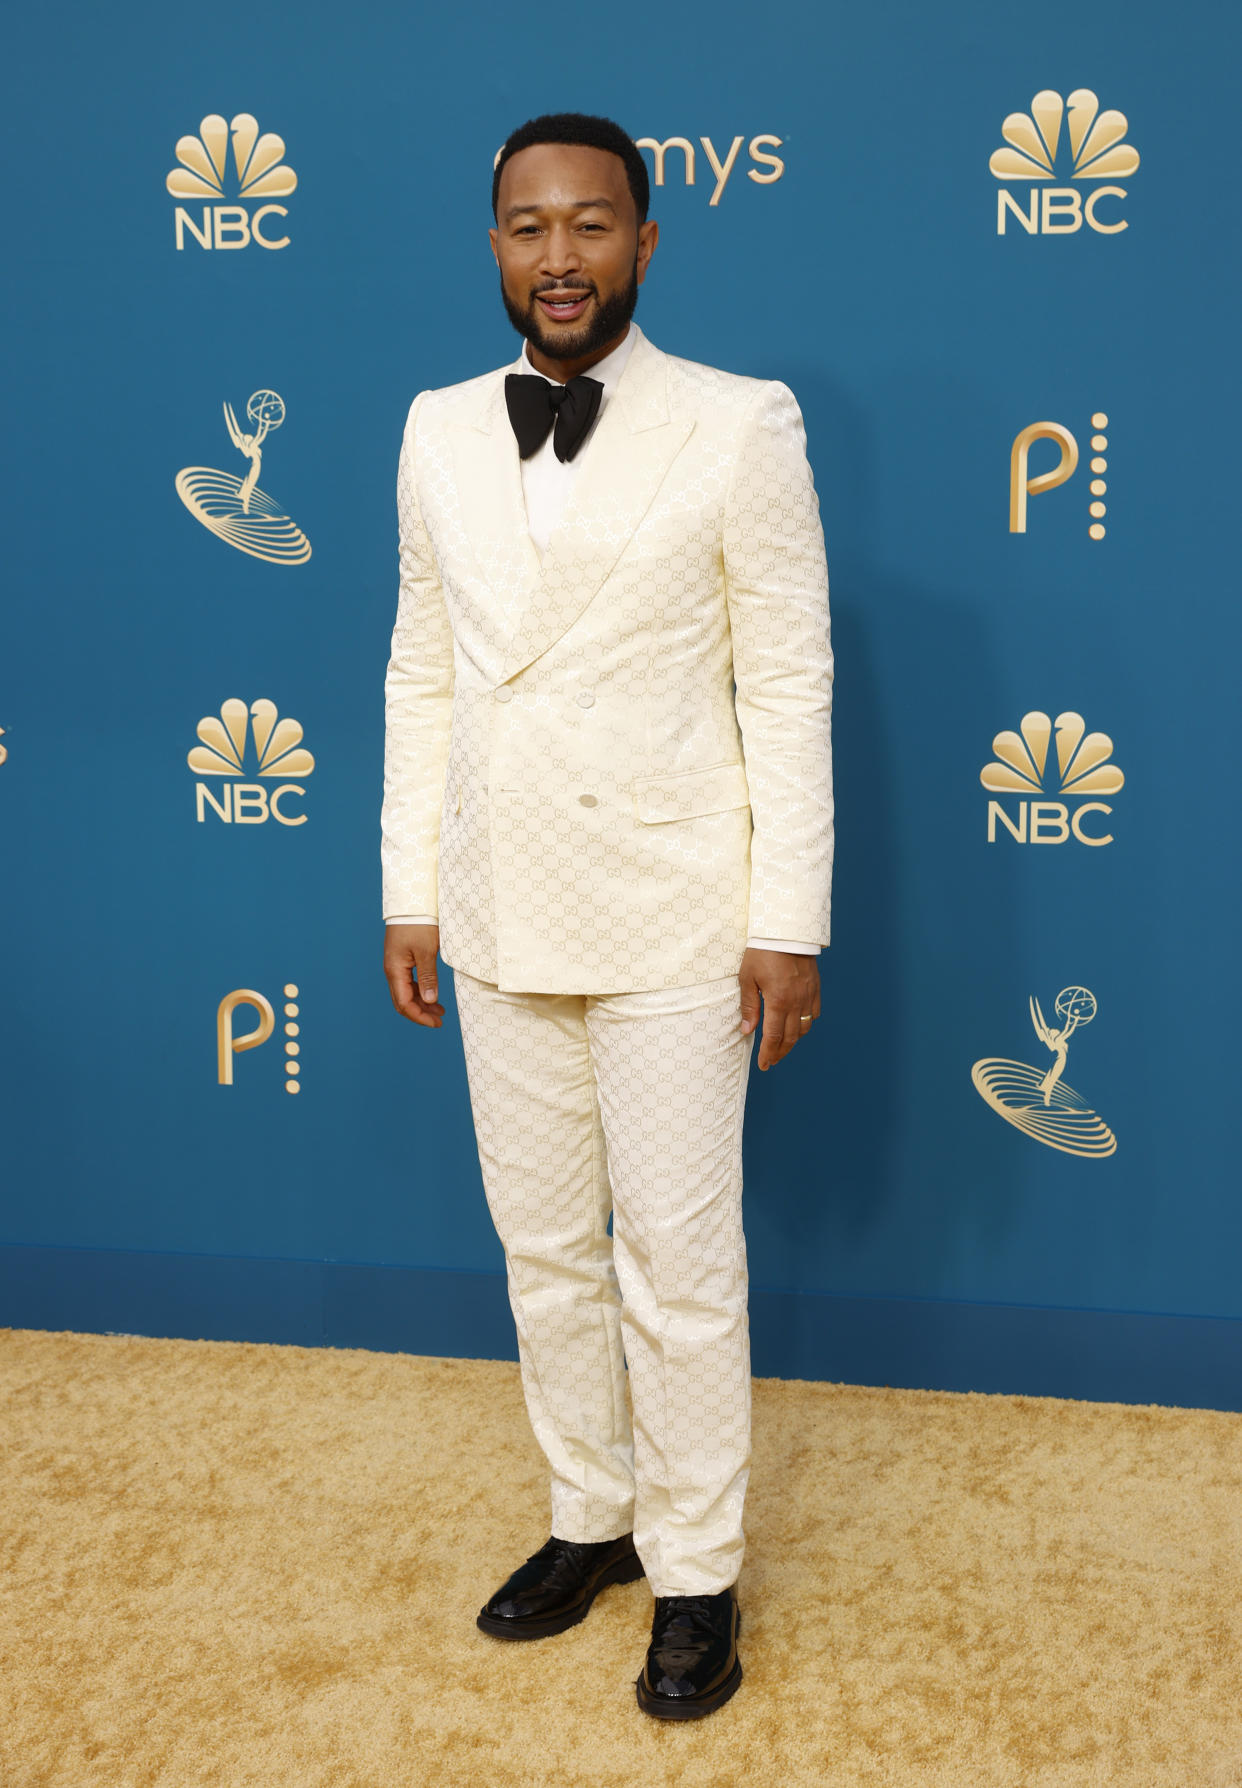 LOS ANGELES, CALIFORNIA - SEPTEMBER 12: 74th ANNUAL PRIMETIME EMMY AWARDS -- Pictured: John Legend arrives to the 74th Annual Primetime Emmy Awards held at the Microsoft Theater on September 12, 2022. -- (Photo by Trae Patton/NBC via Getty Images)